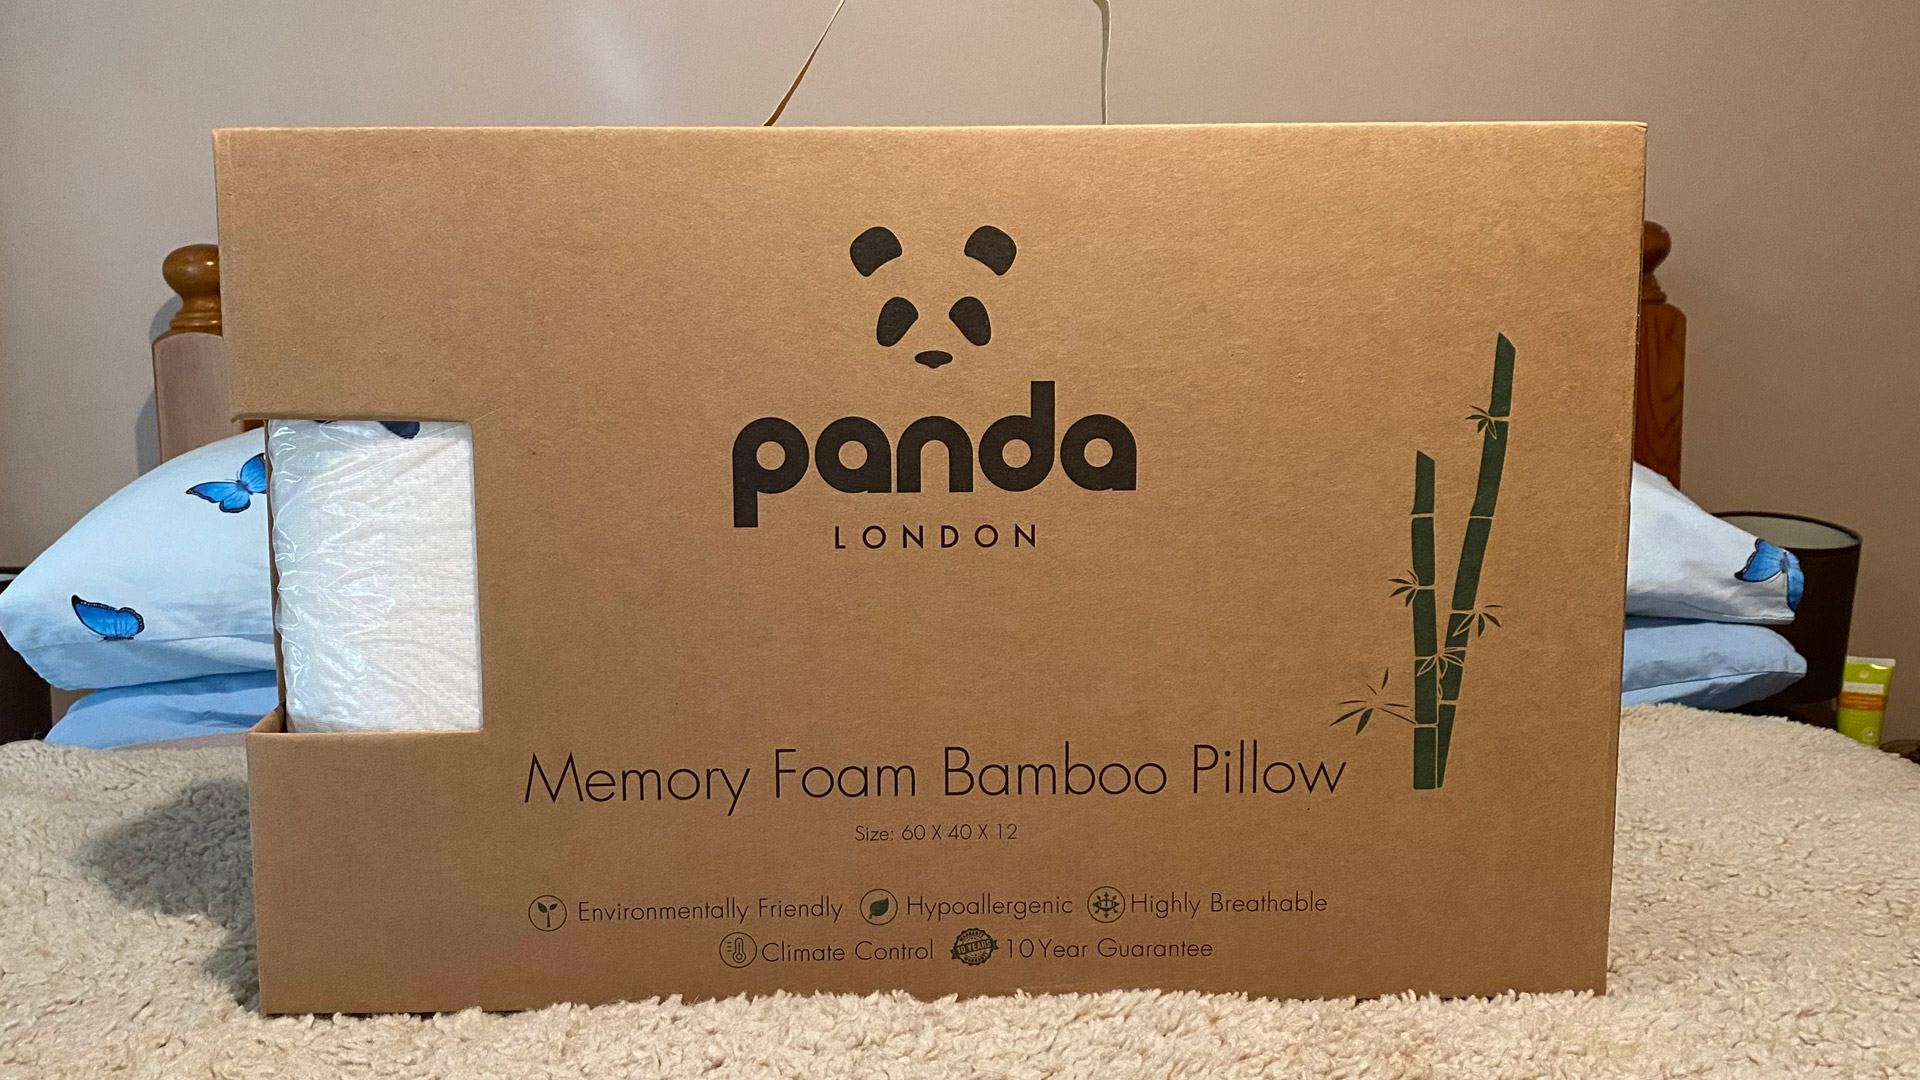 The Panda Memory Foam Bamboo Pillow in its delivery box